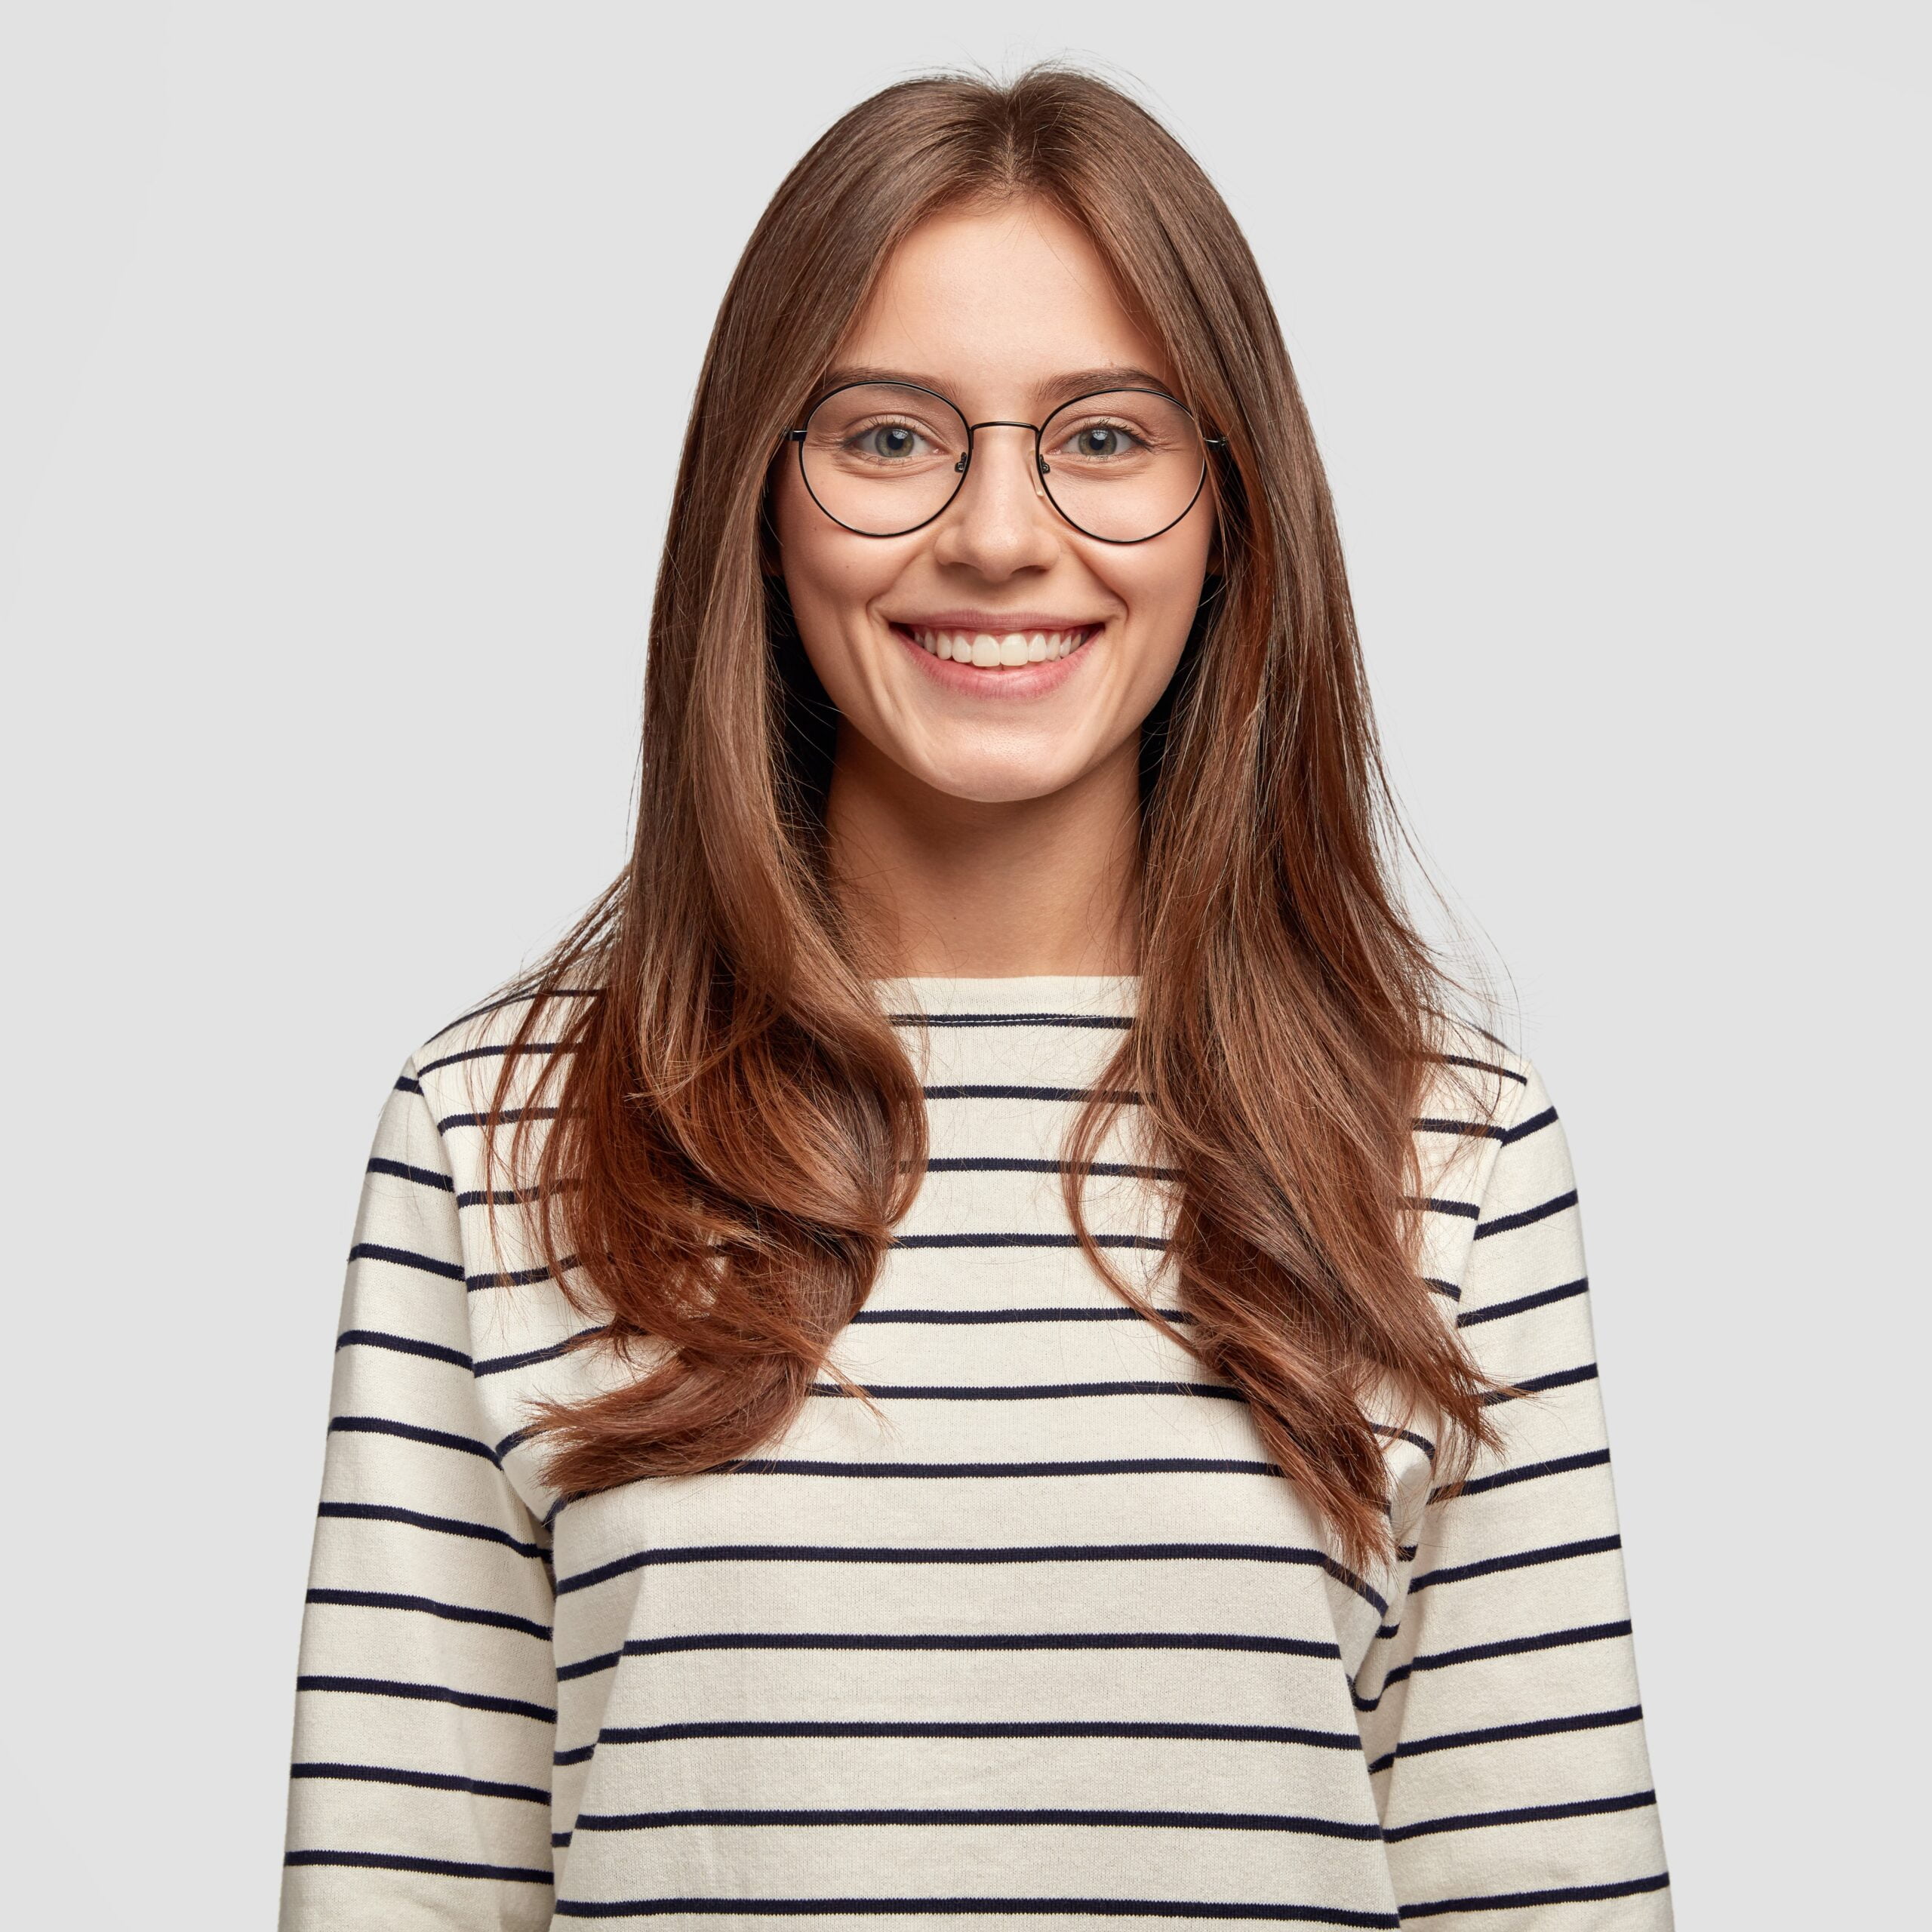 Indoor shot of attractive European schoolgirl has toothy smile, dressed in striped sweater, rejoices positive moment in life, wears round spectacles. People, lifestyle and positive emotions concept